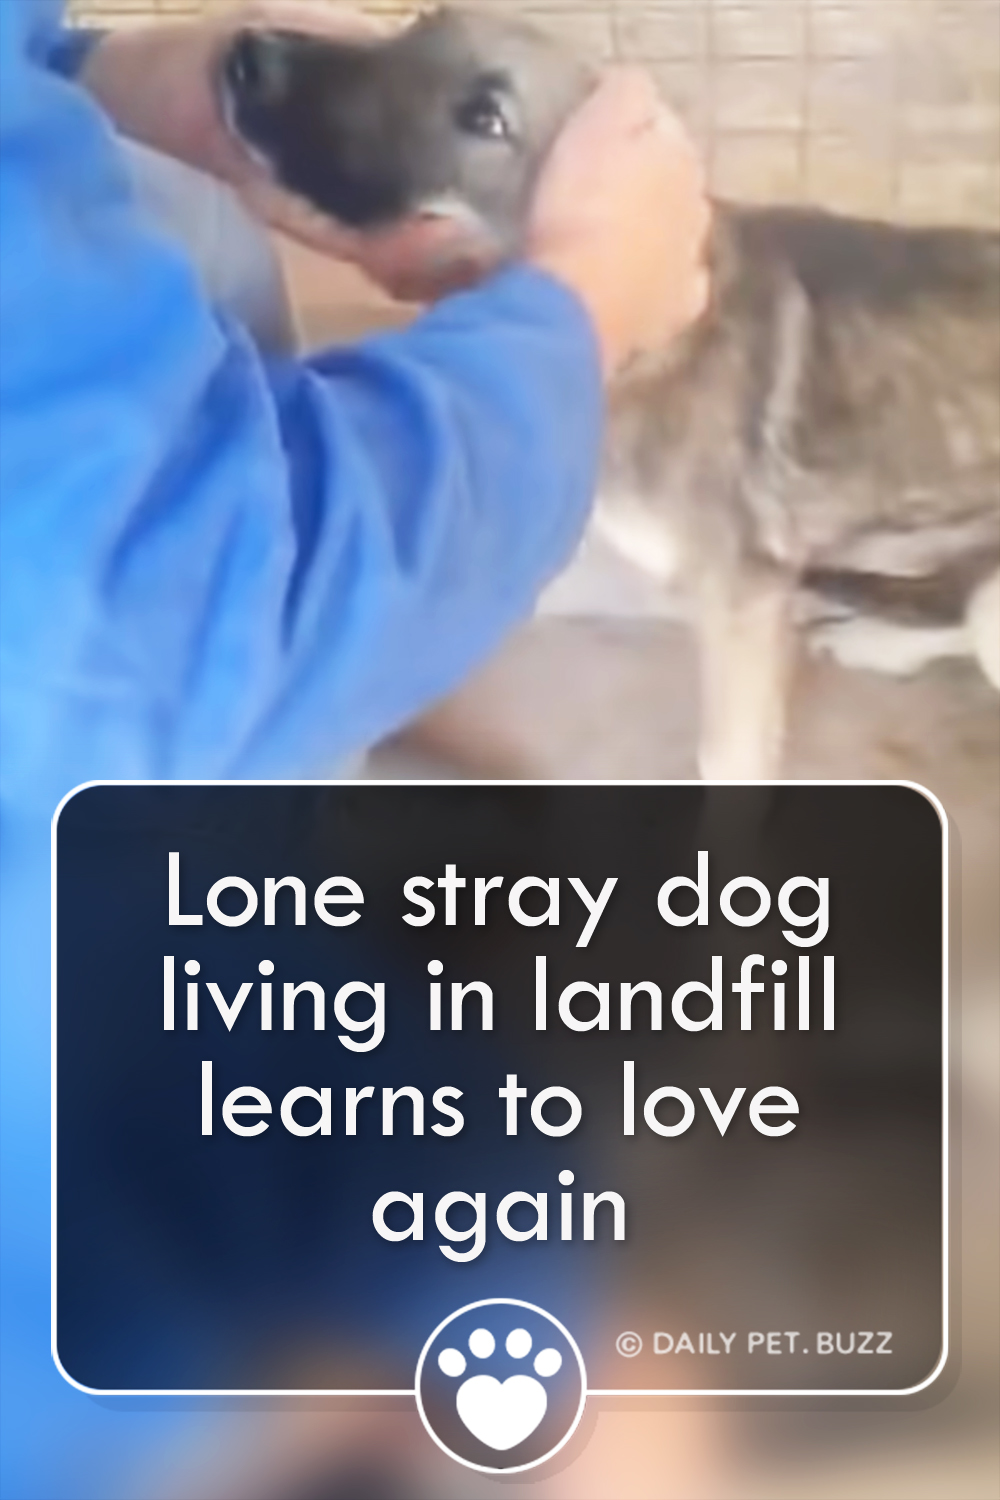 Lone stray dog living in landfill learns to love again